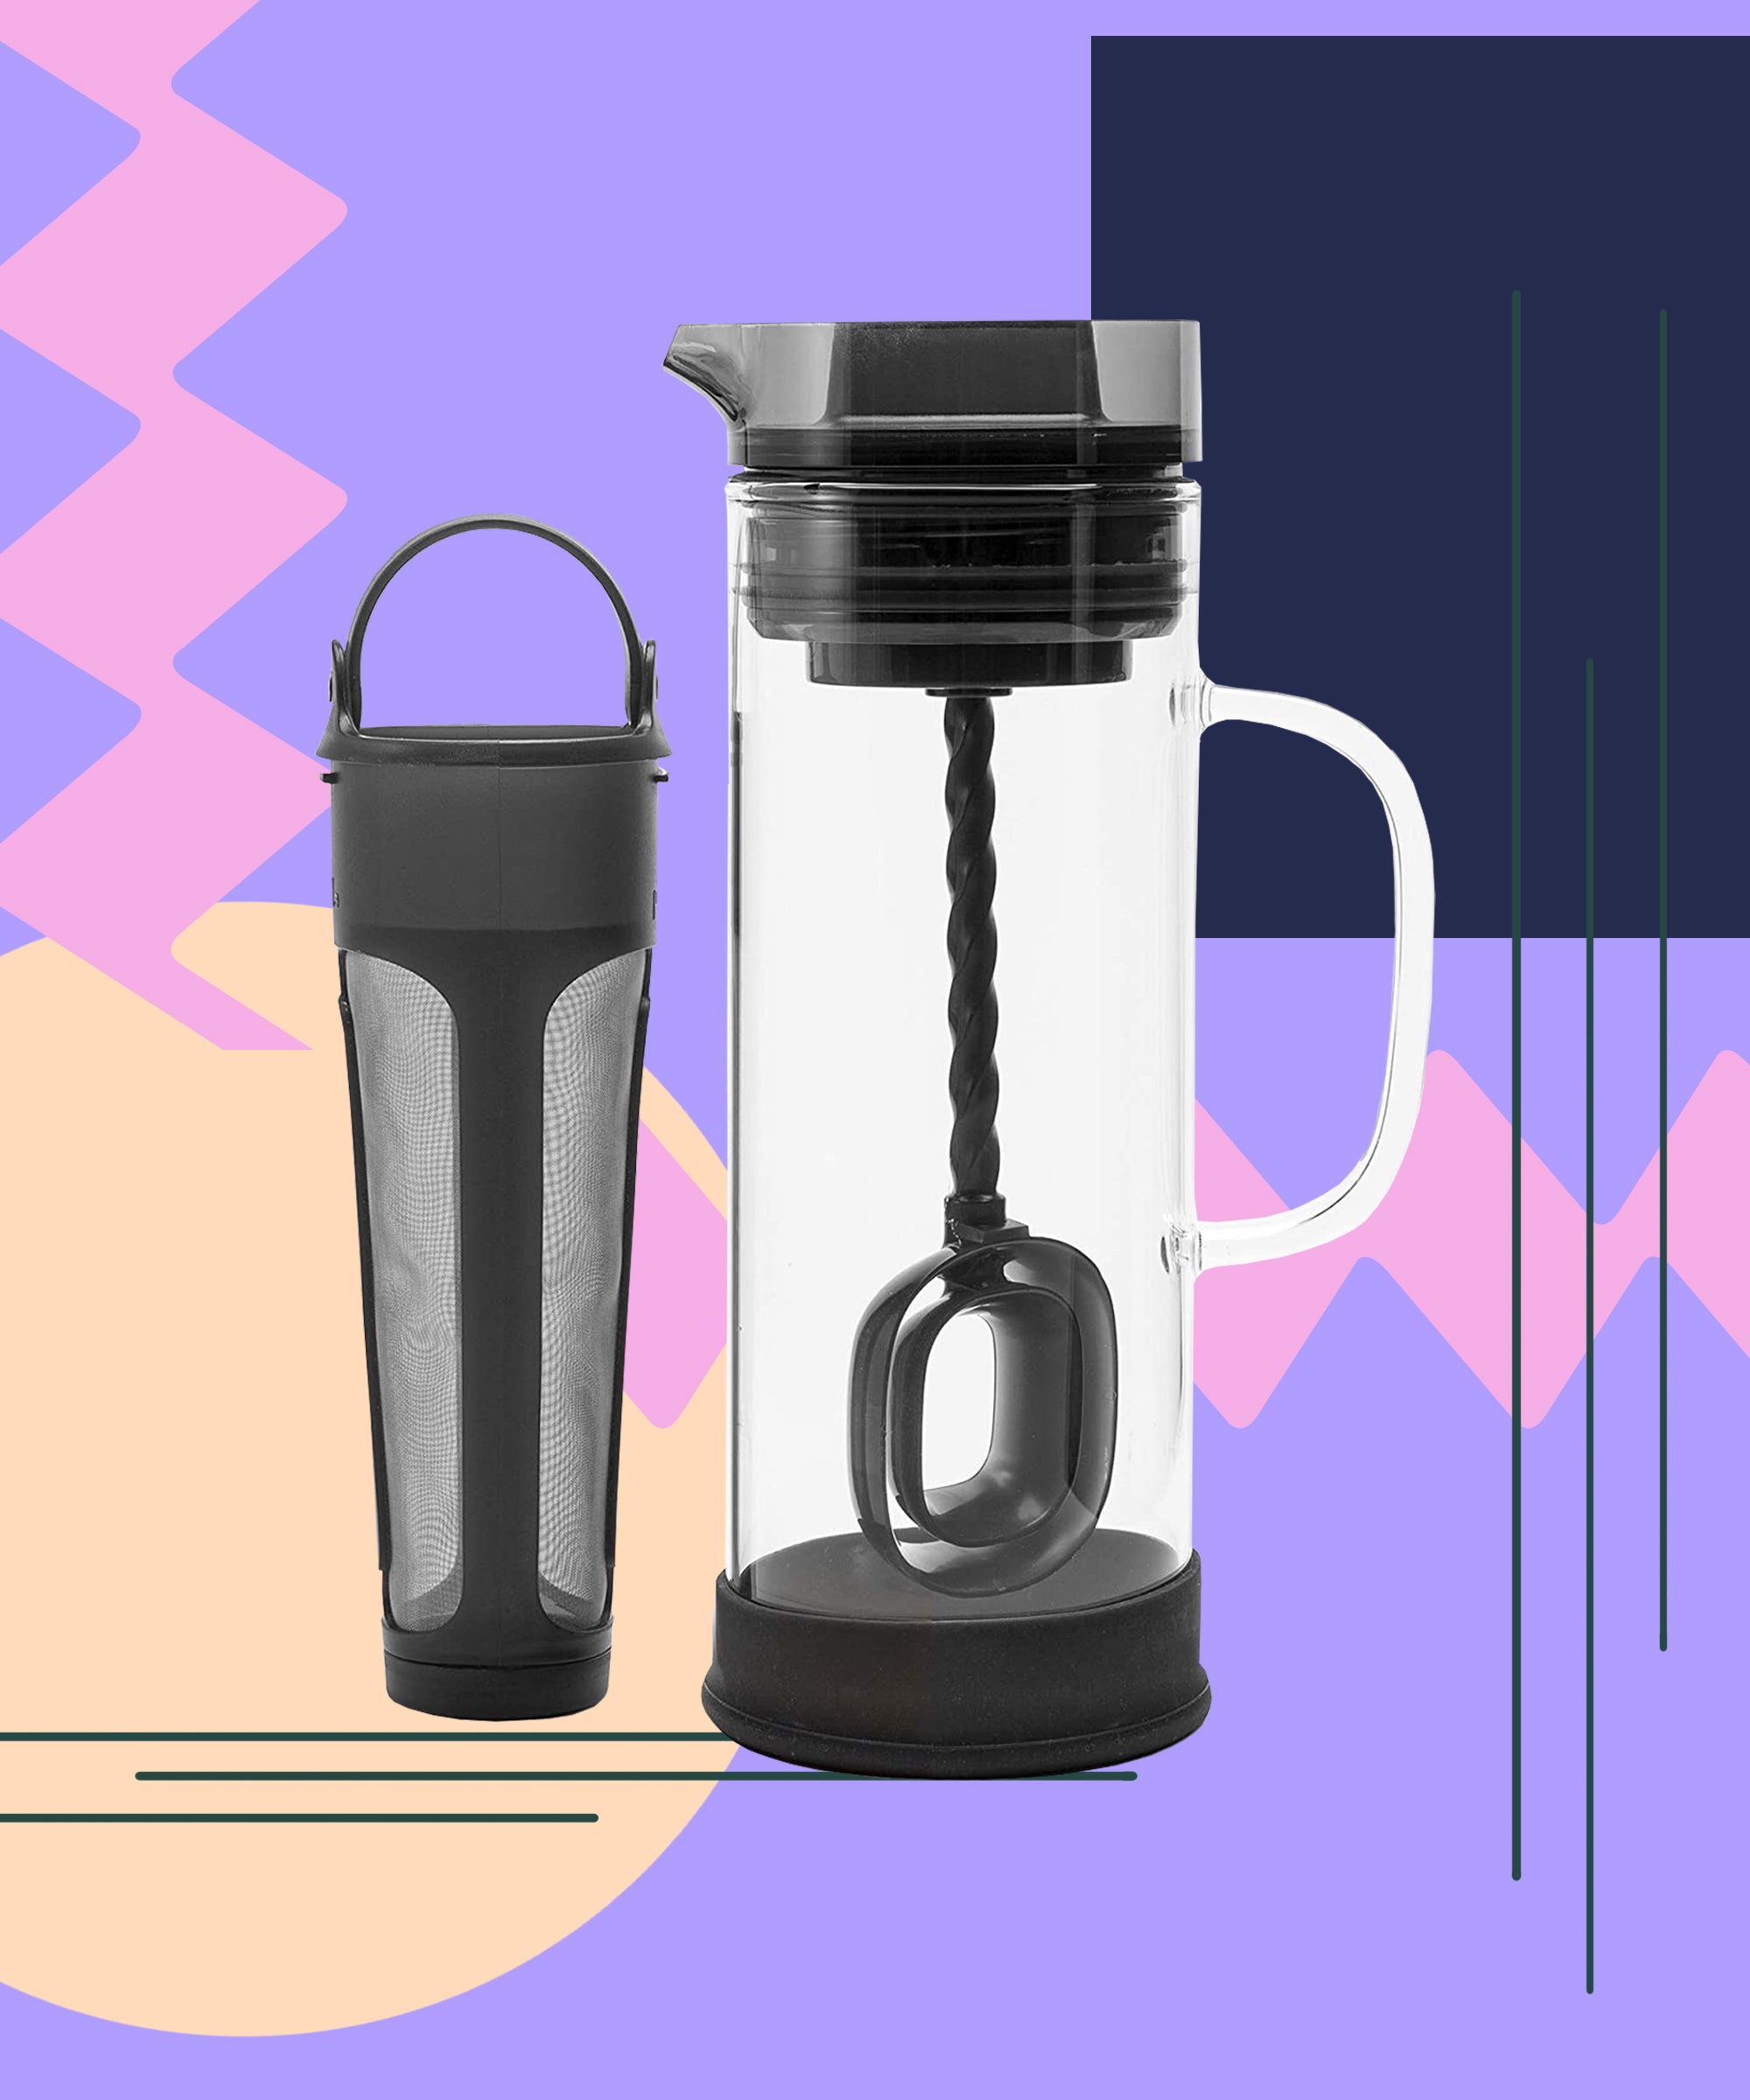 This $30 Cold Brew Maker Breaks Even In 2 Months